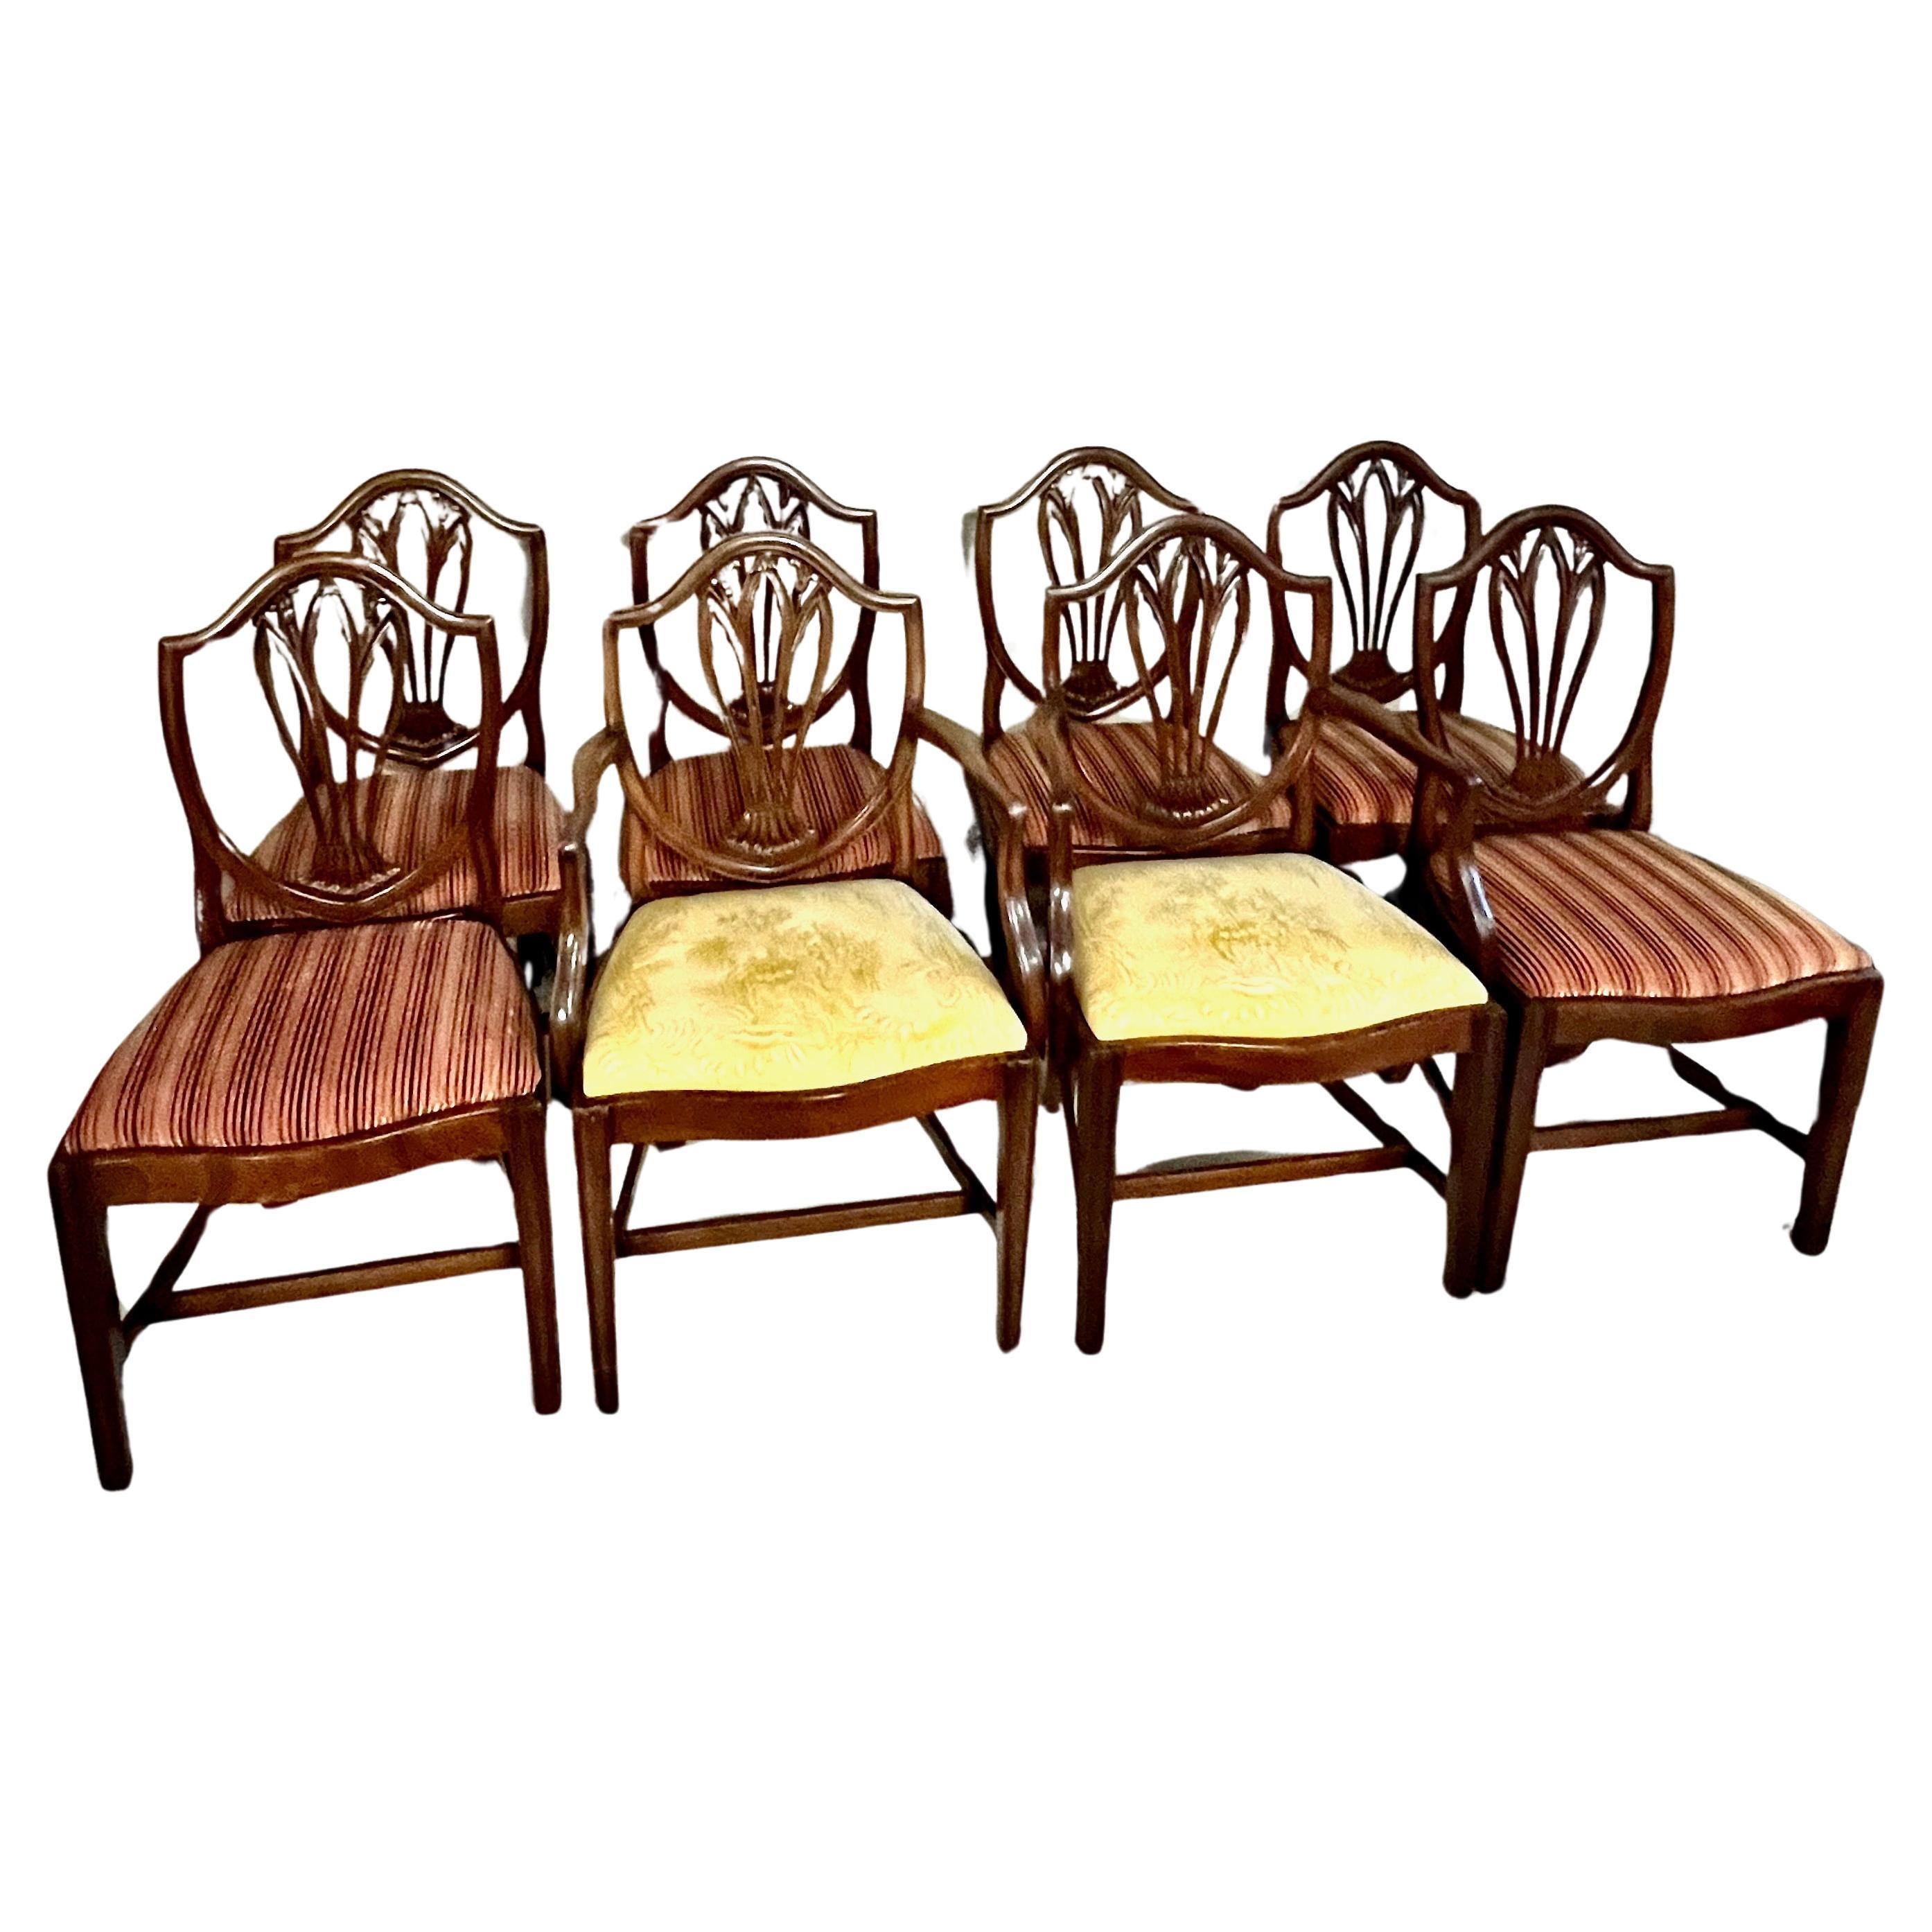 Set of 8 George III Shield Back Dining Chairs c. 1760-1780 For Sale 3